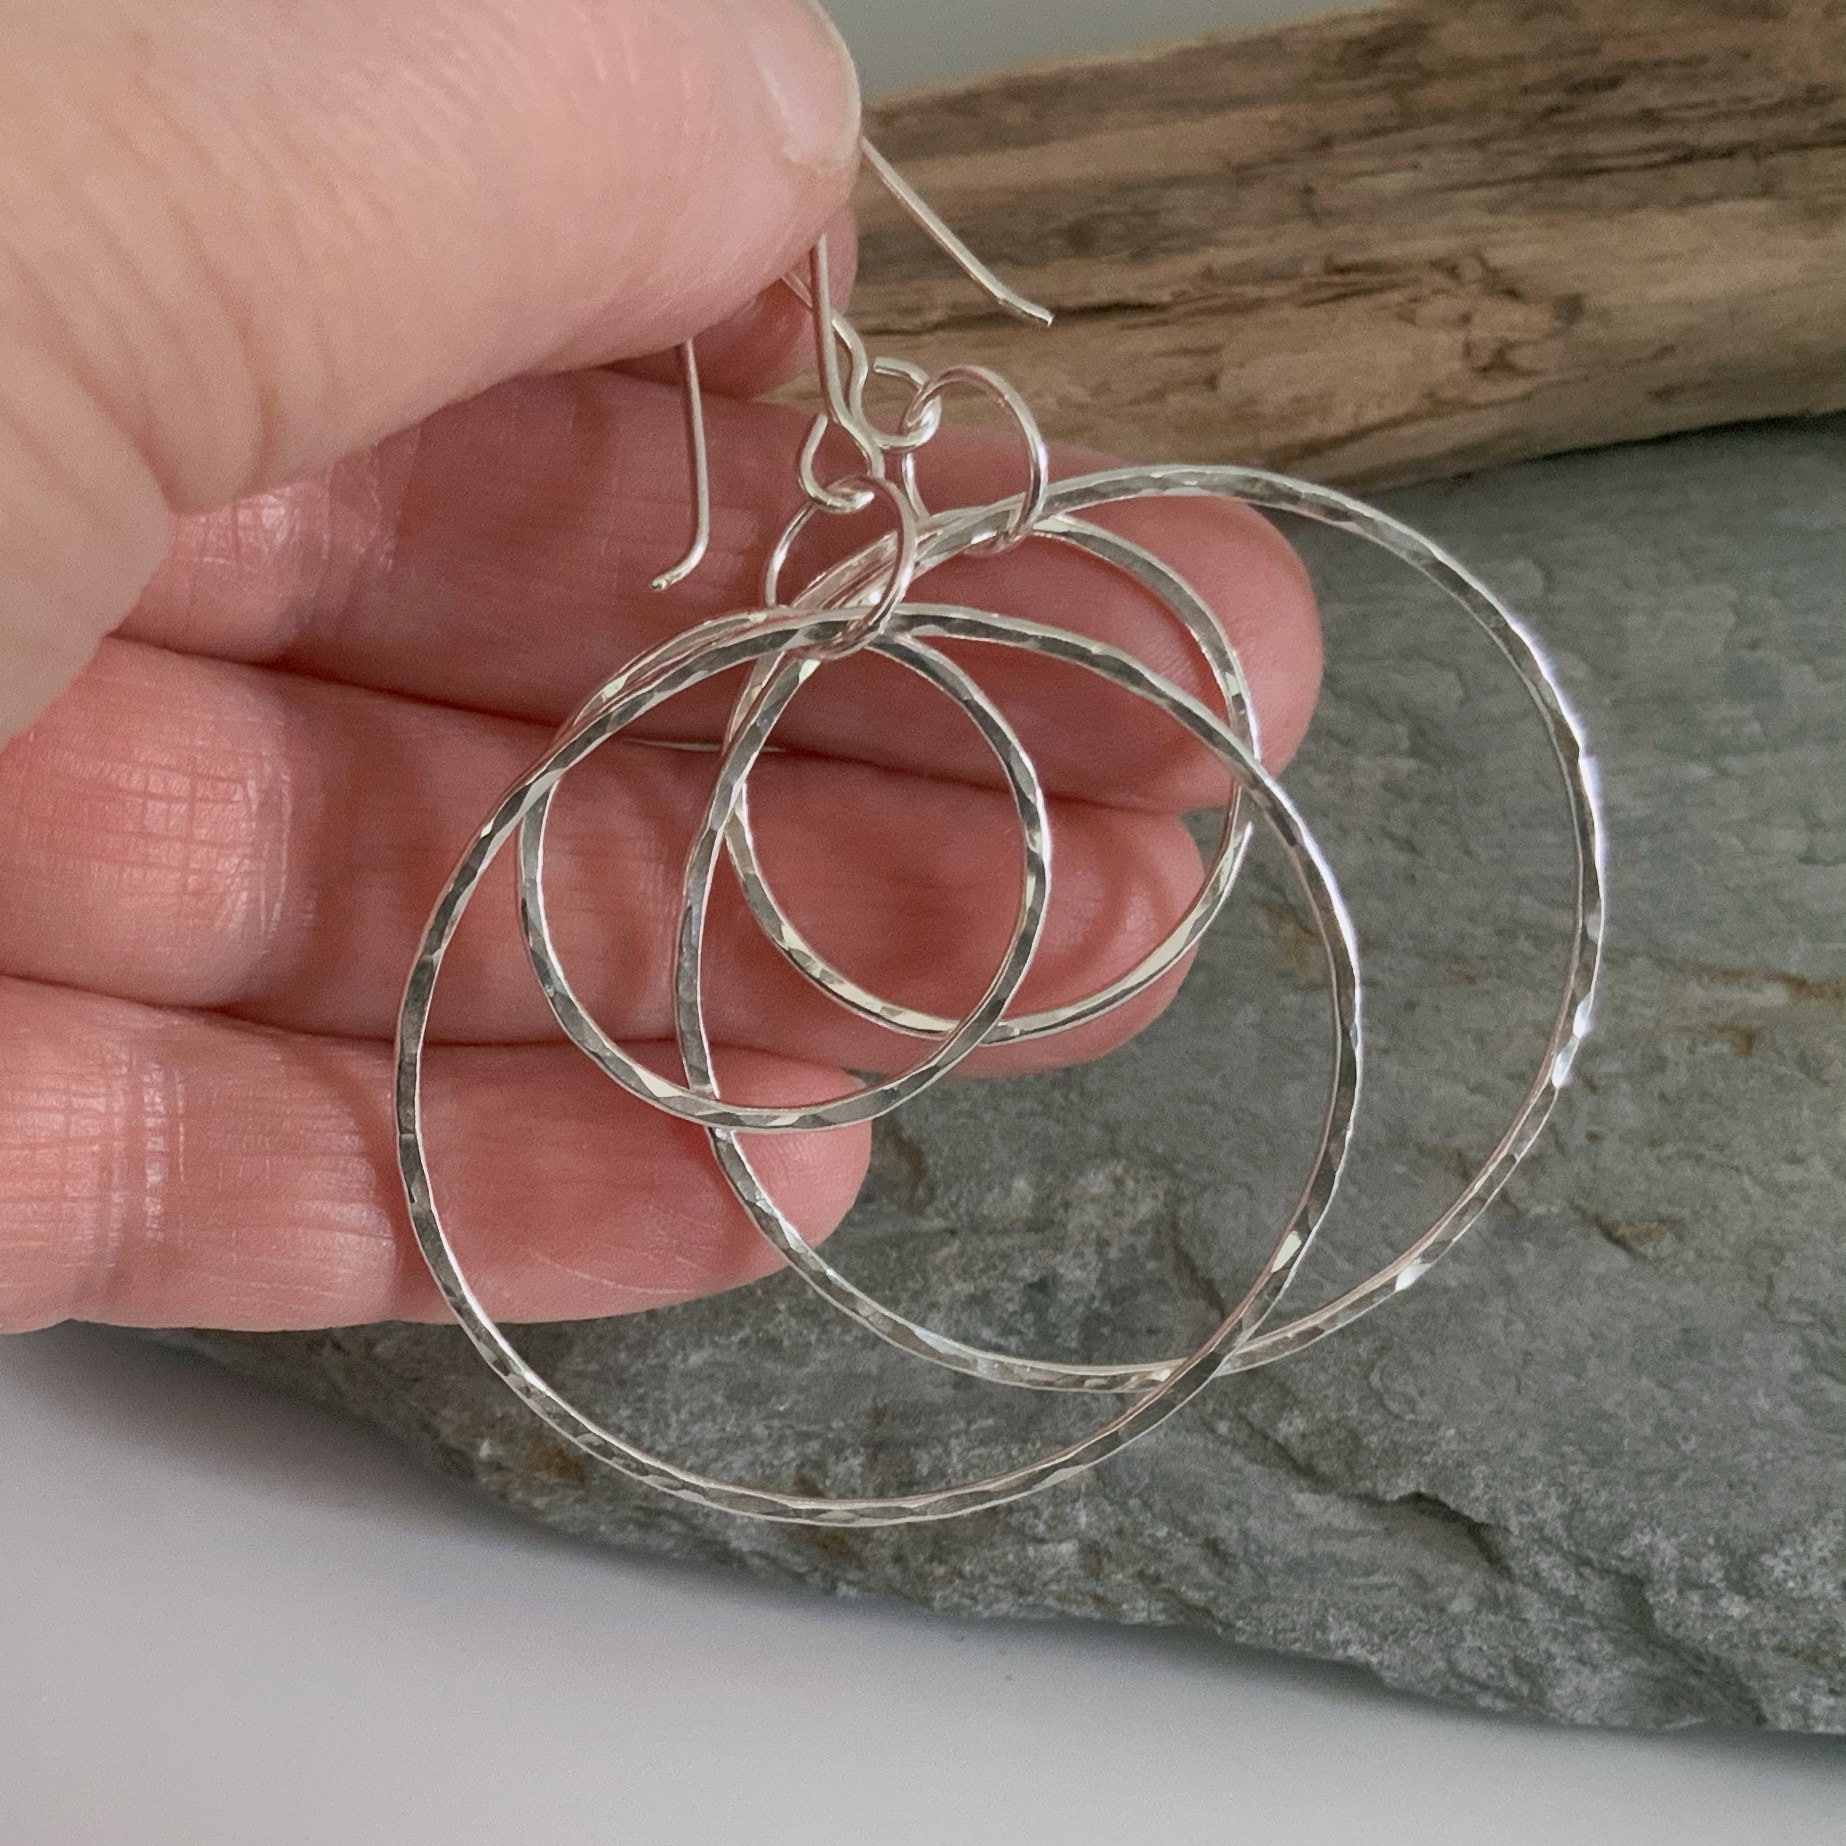 Silver Hoop Earrings With A Sparkly Hammered Finish, Dangly Double Earrings, Large Round Solid Silver Creole